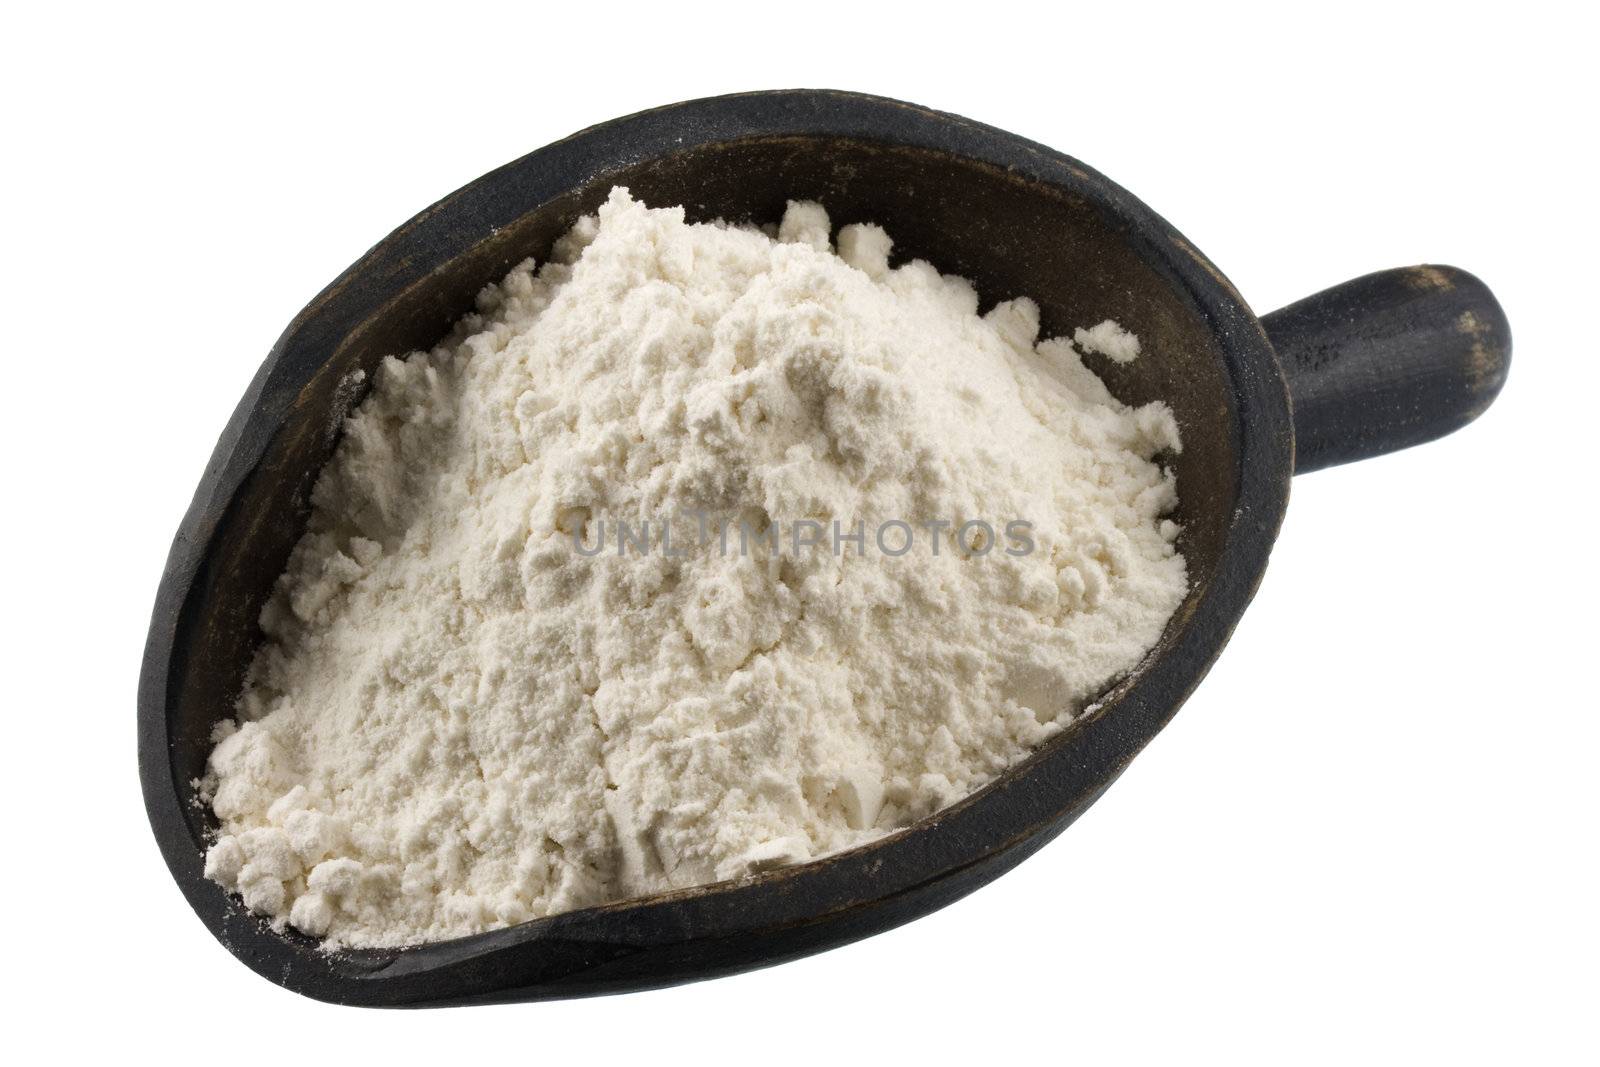 scoop of wheat flour or other white powder by PixelsAway